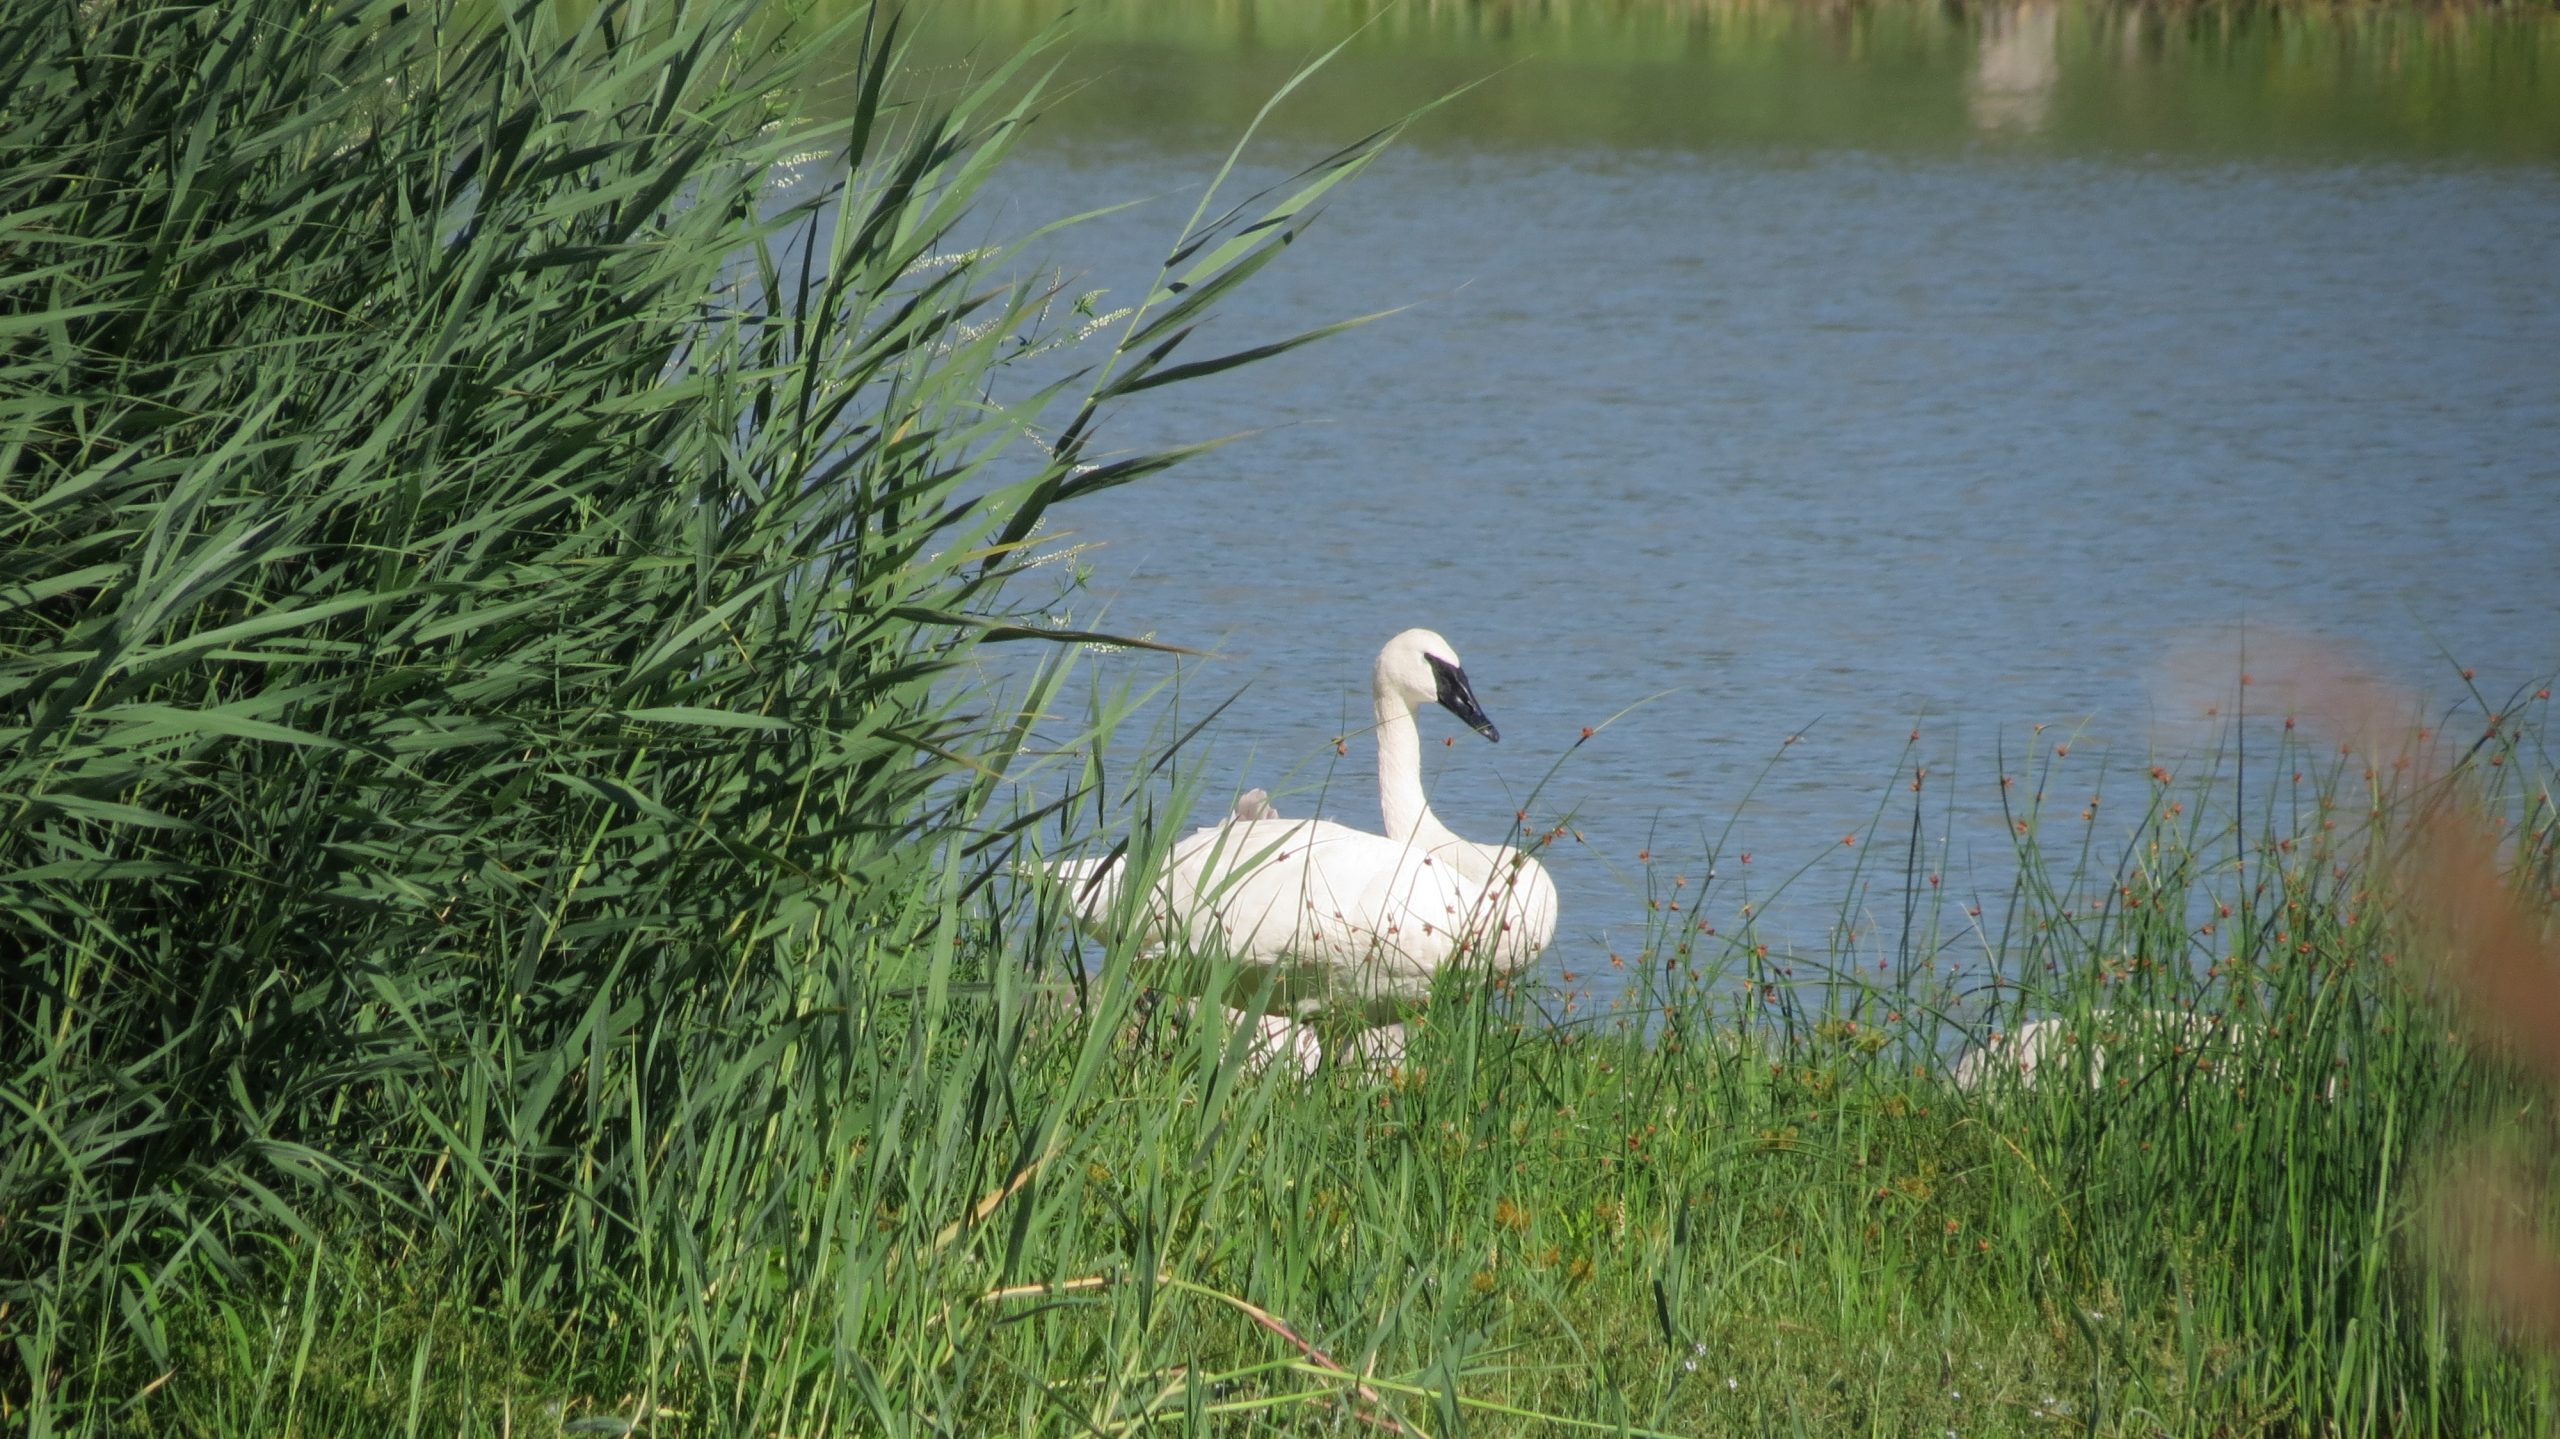 A trumpeter swan with white plumage and an all-black beak near the water at Tommy Thompson Park.